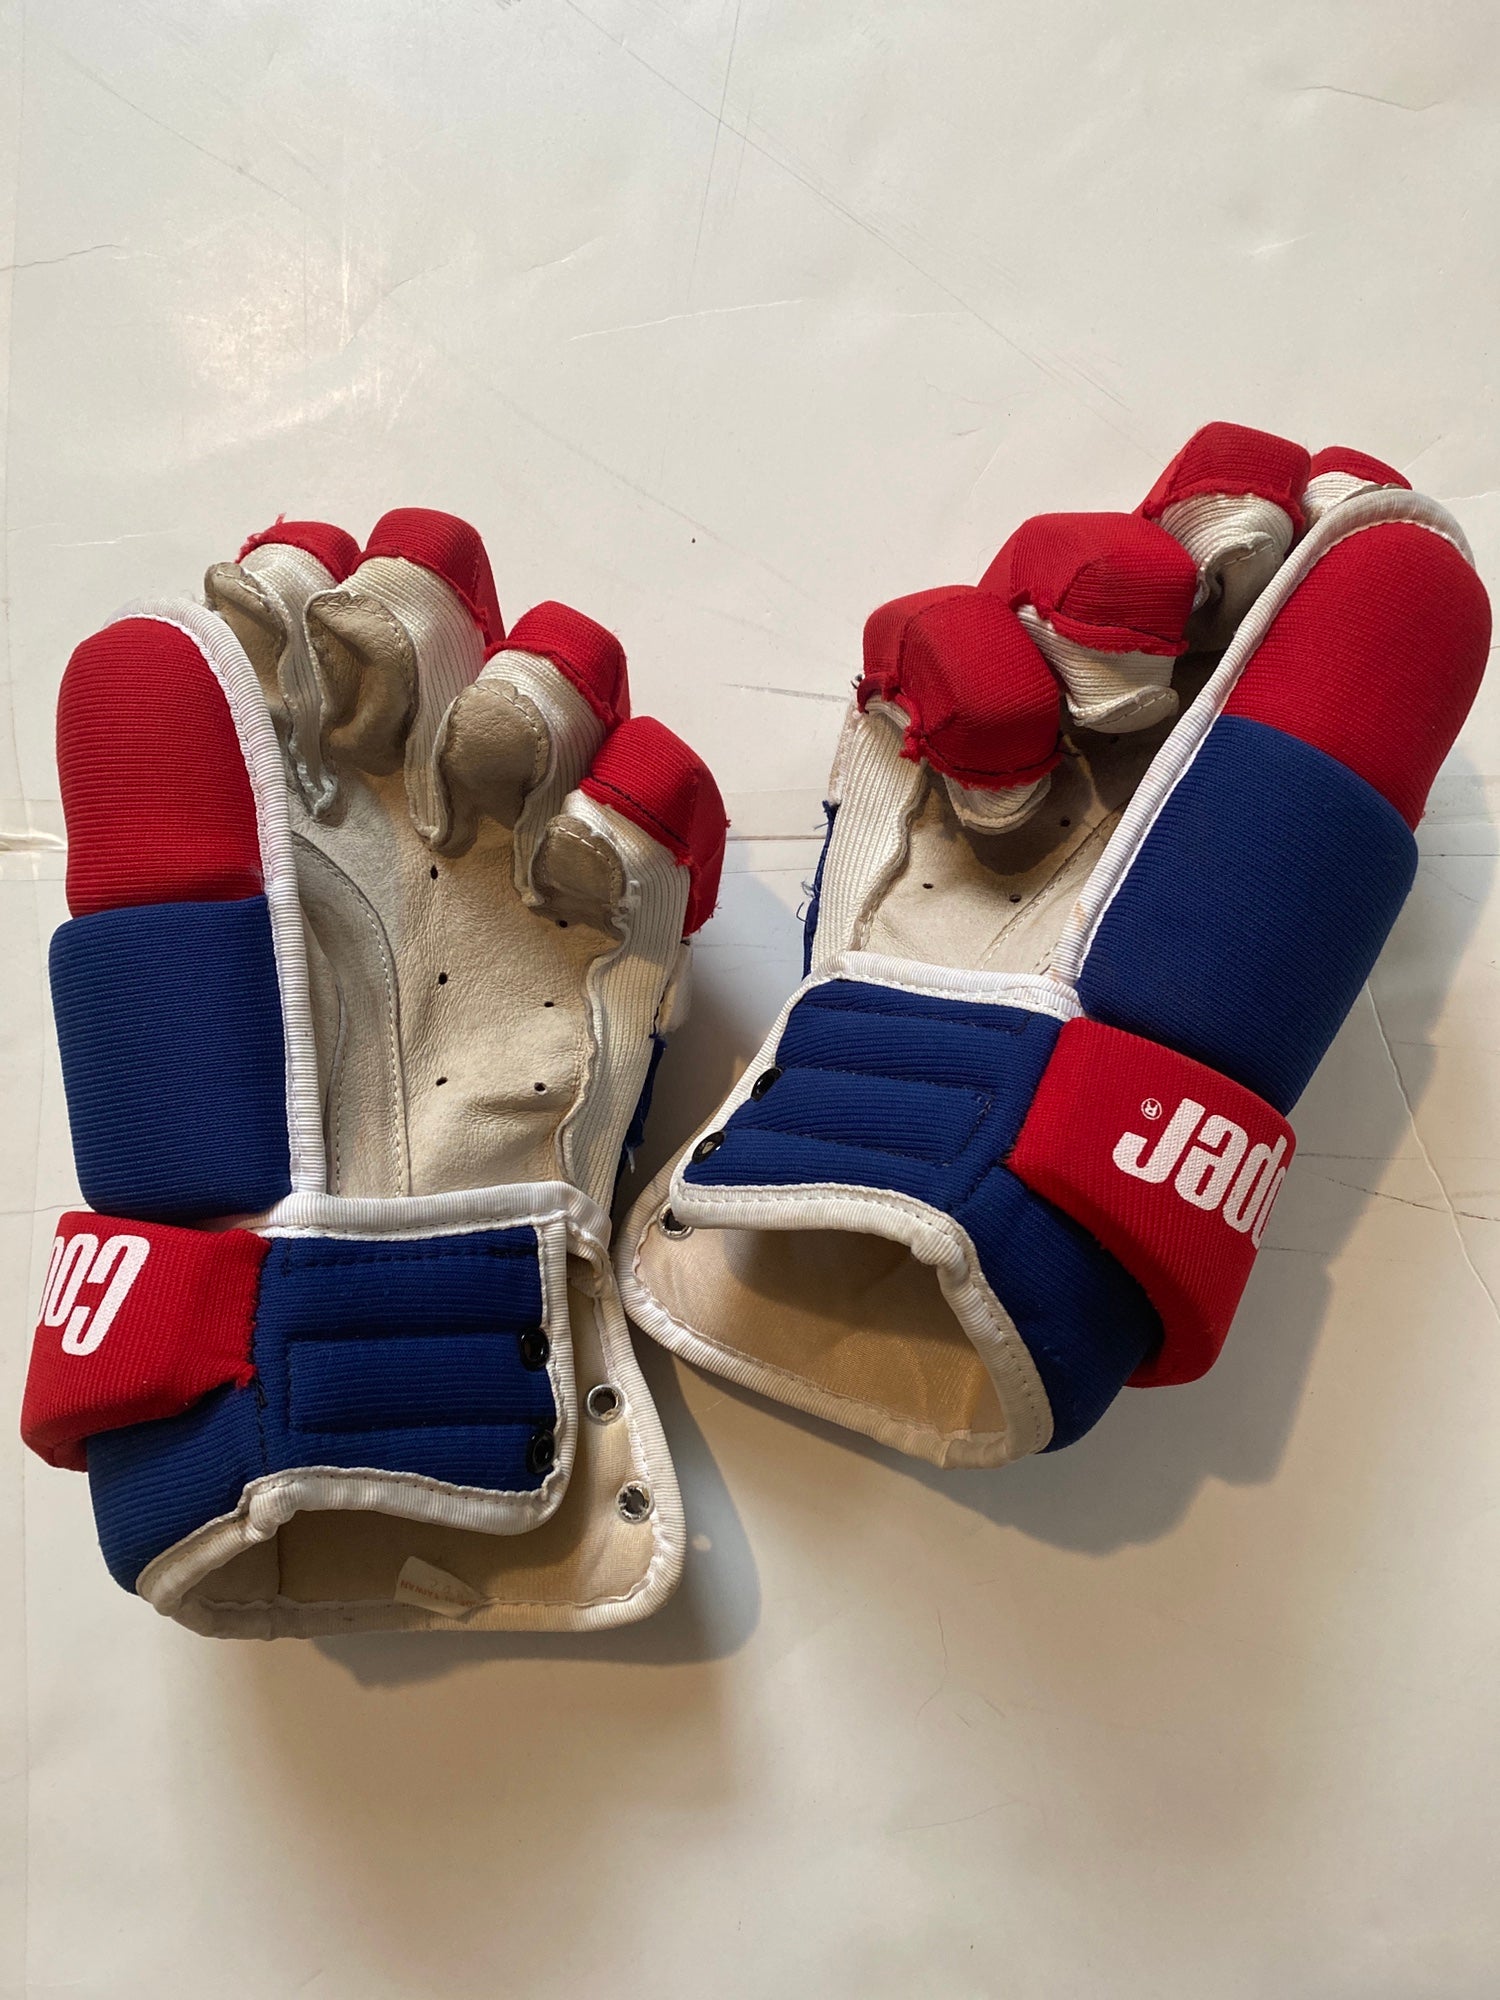 2 COOPER HGL 600 HOCKEY GLOVES LEATHER PREOWNED 3-D FLEX Details about   VINTAGE PAIR 